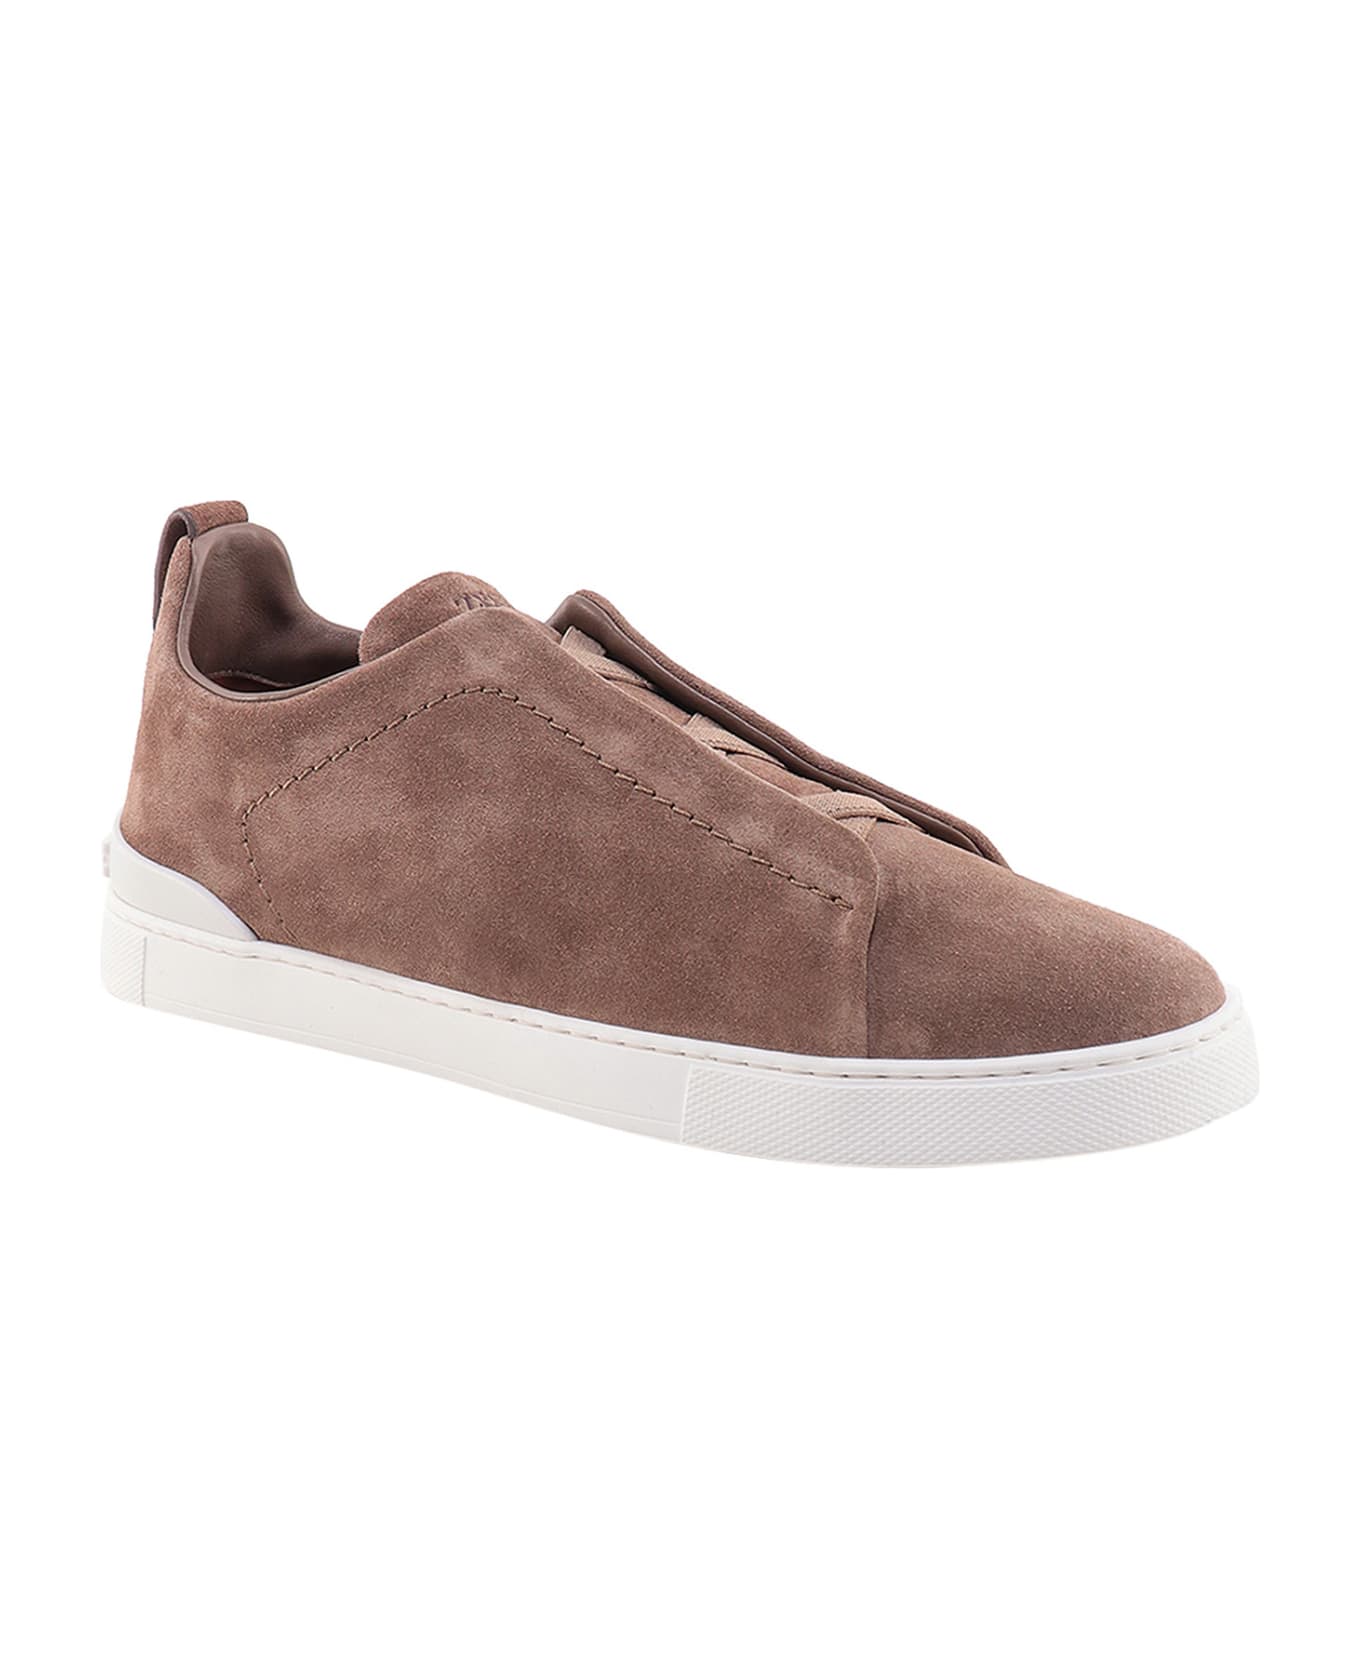 Zegna Triple Stitch Sneakers - Brown スニーカー